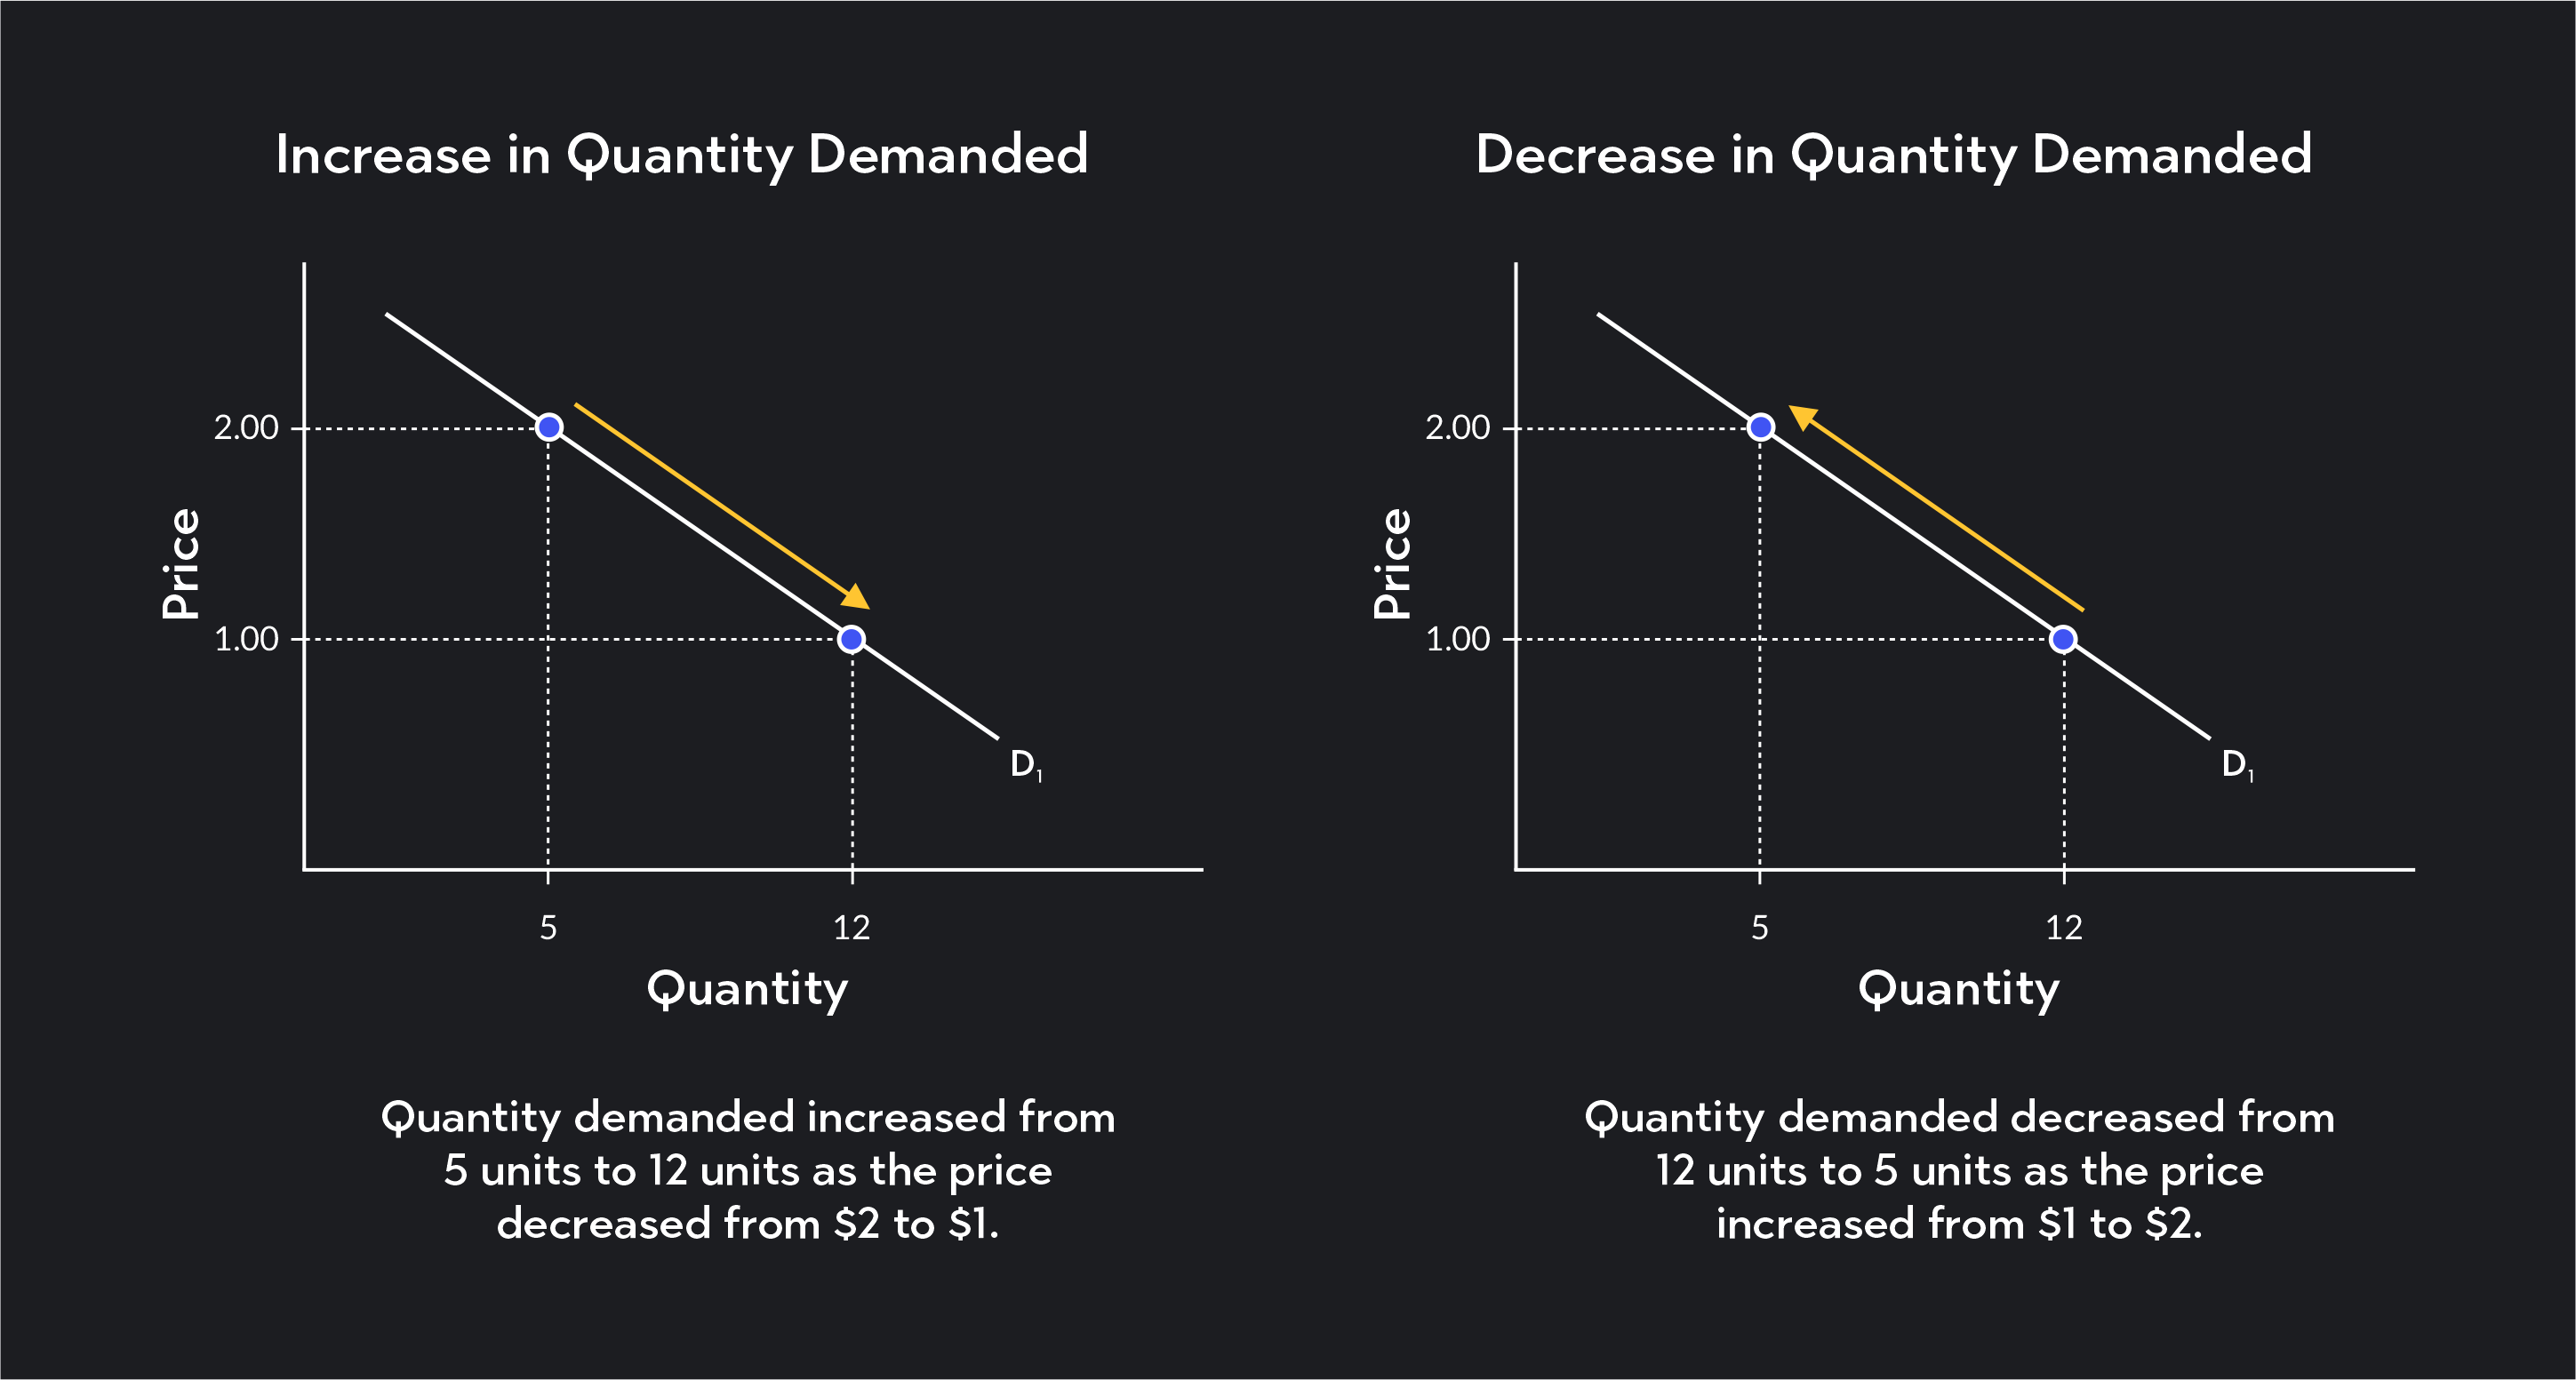 Graph showing increase in quantity demanded and decrease in quantity demanded